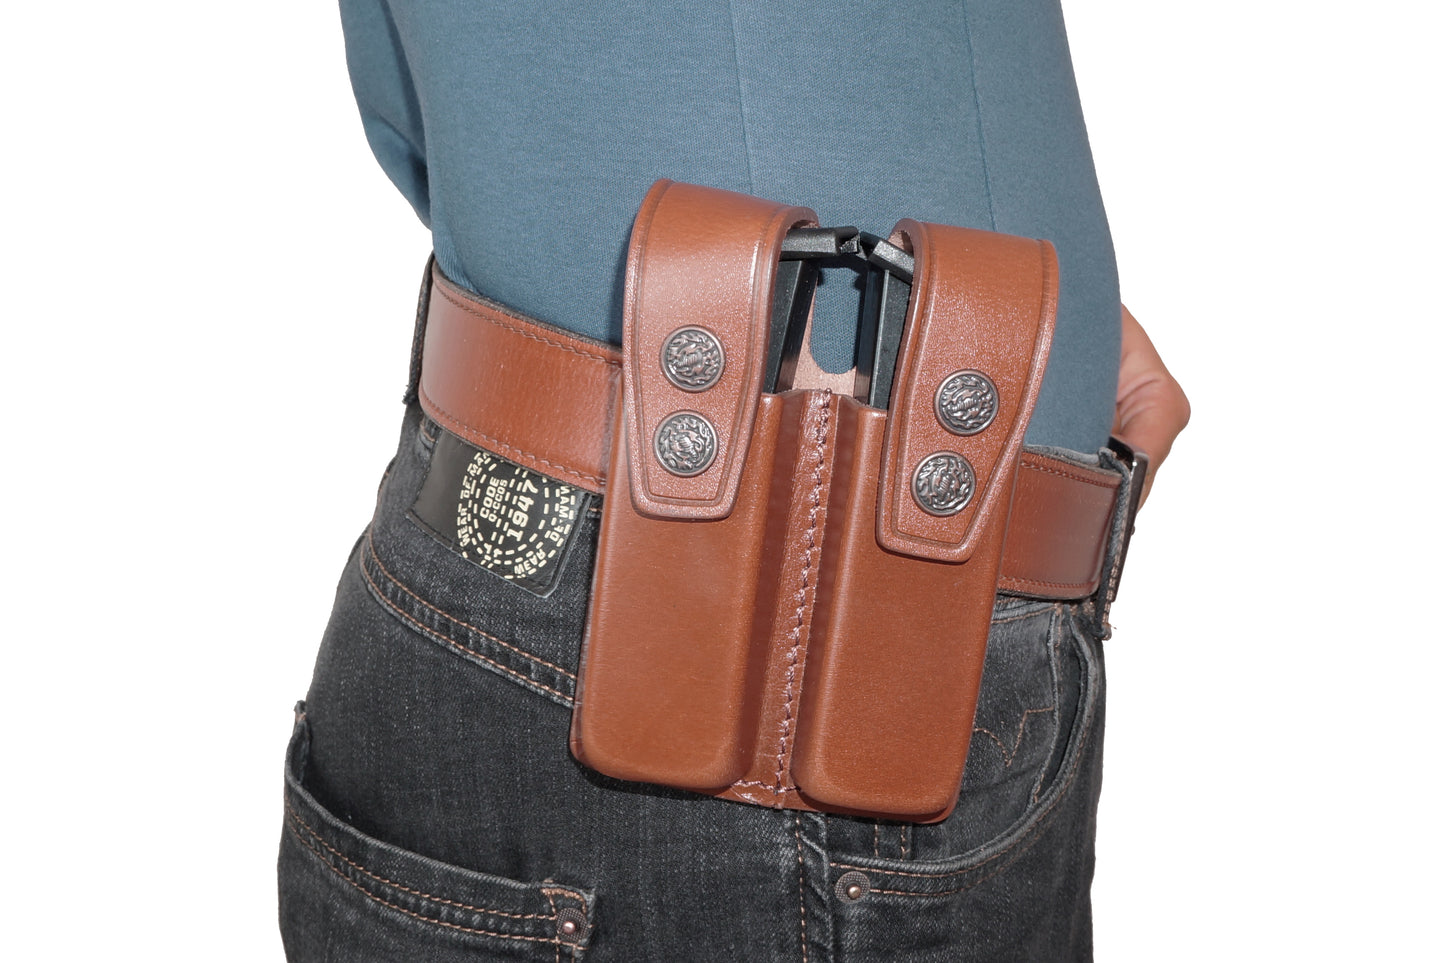 Holster K092 Leather Double Magazine Pouch/Carrier/case for Glock 17 19 22 23 Handmade!